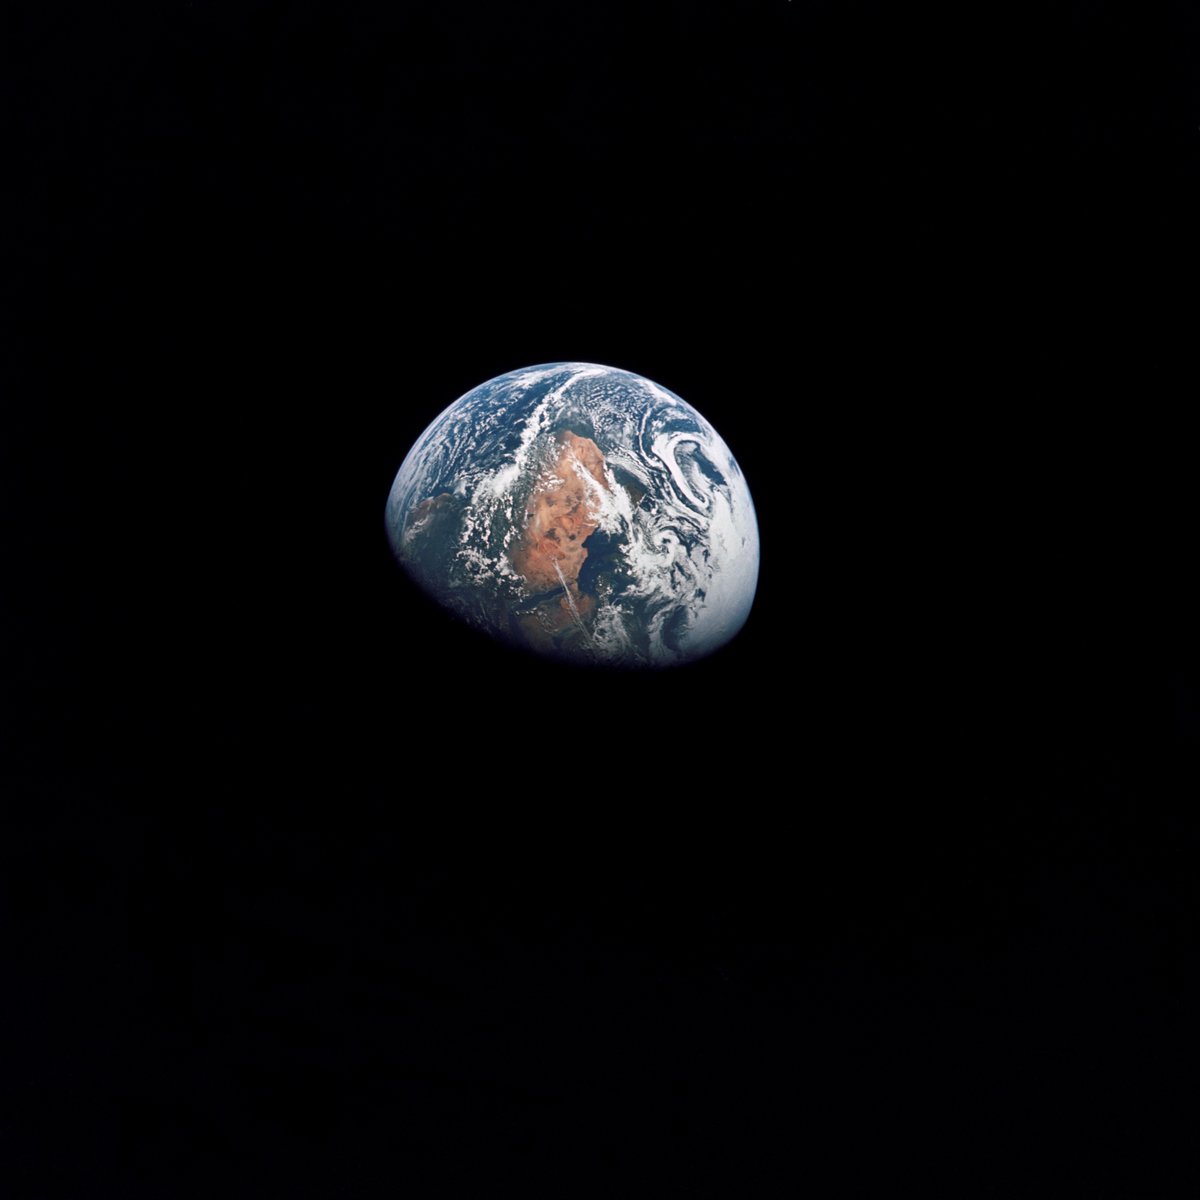 From 100,000 miles away 📸 This Apollo 10 image of Earth was taken 55 years ago in 1969.